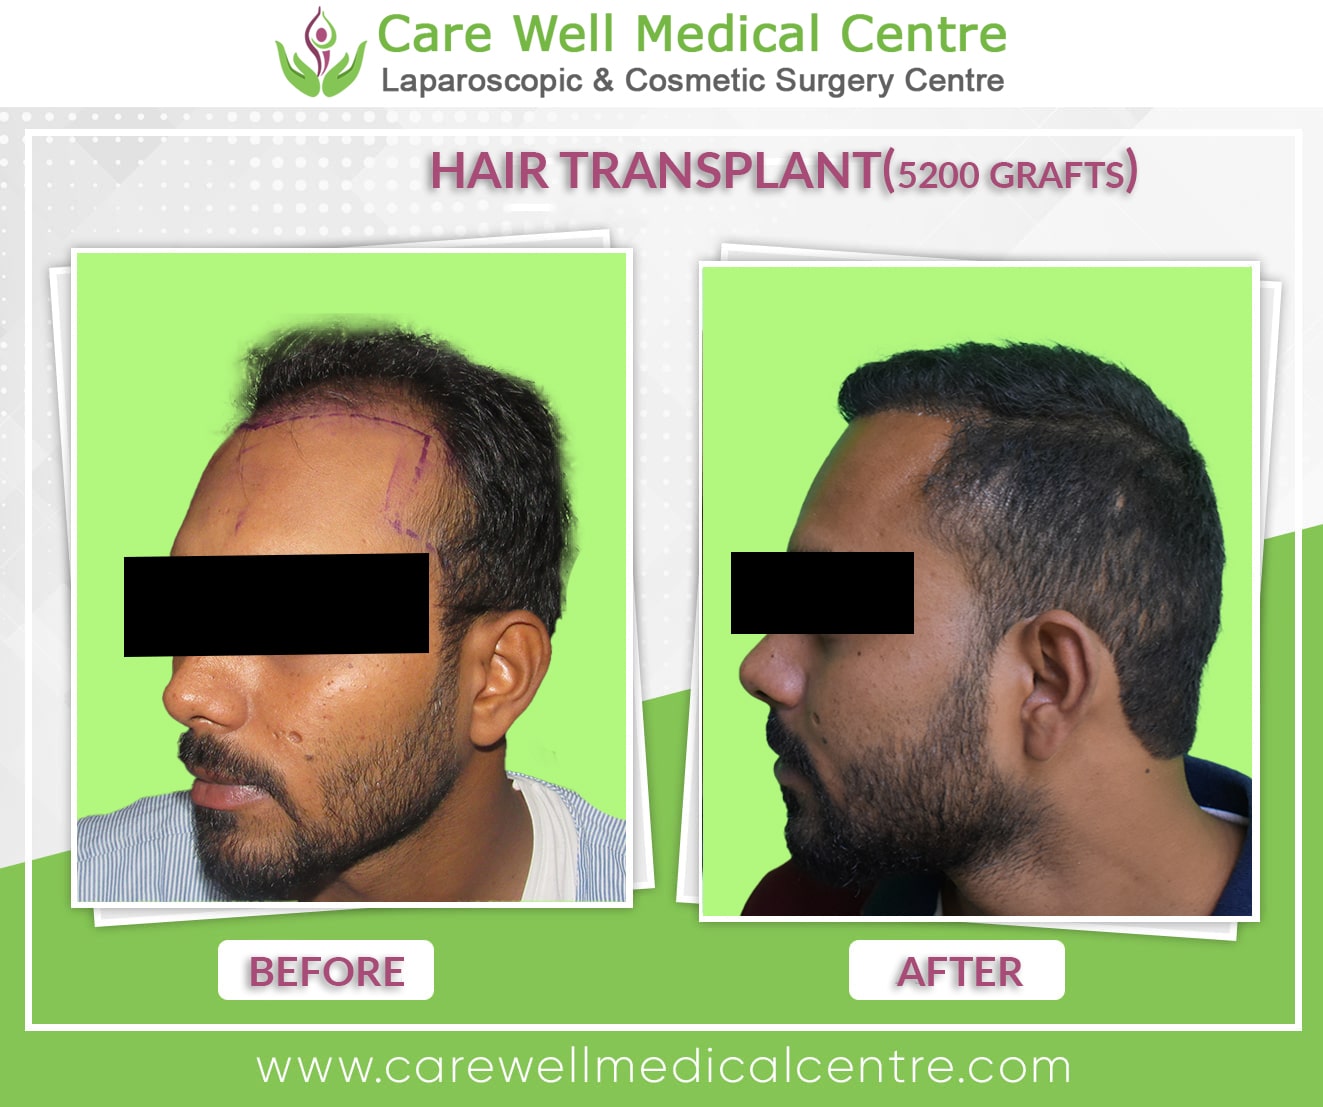 Hair Transplant Before And After Photos Care Well Medical Centre